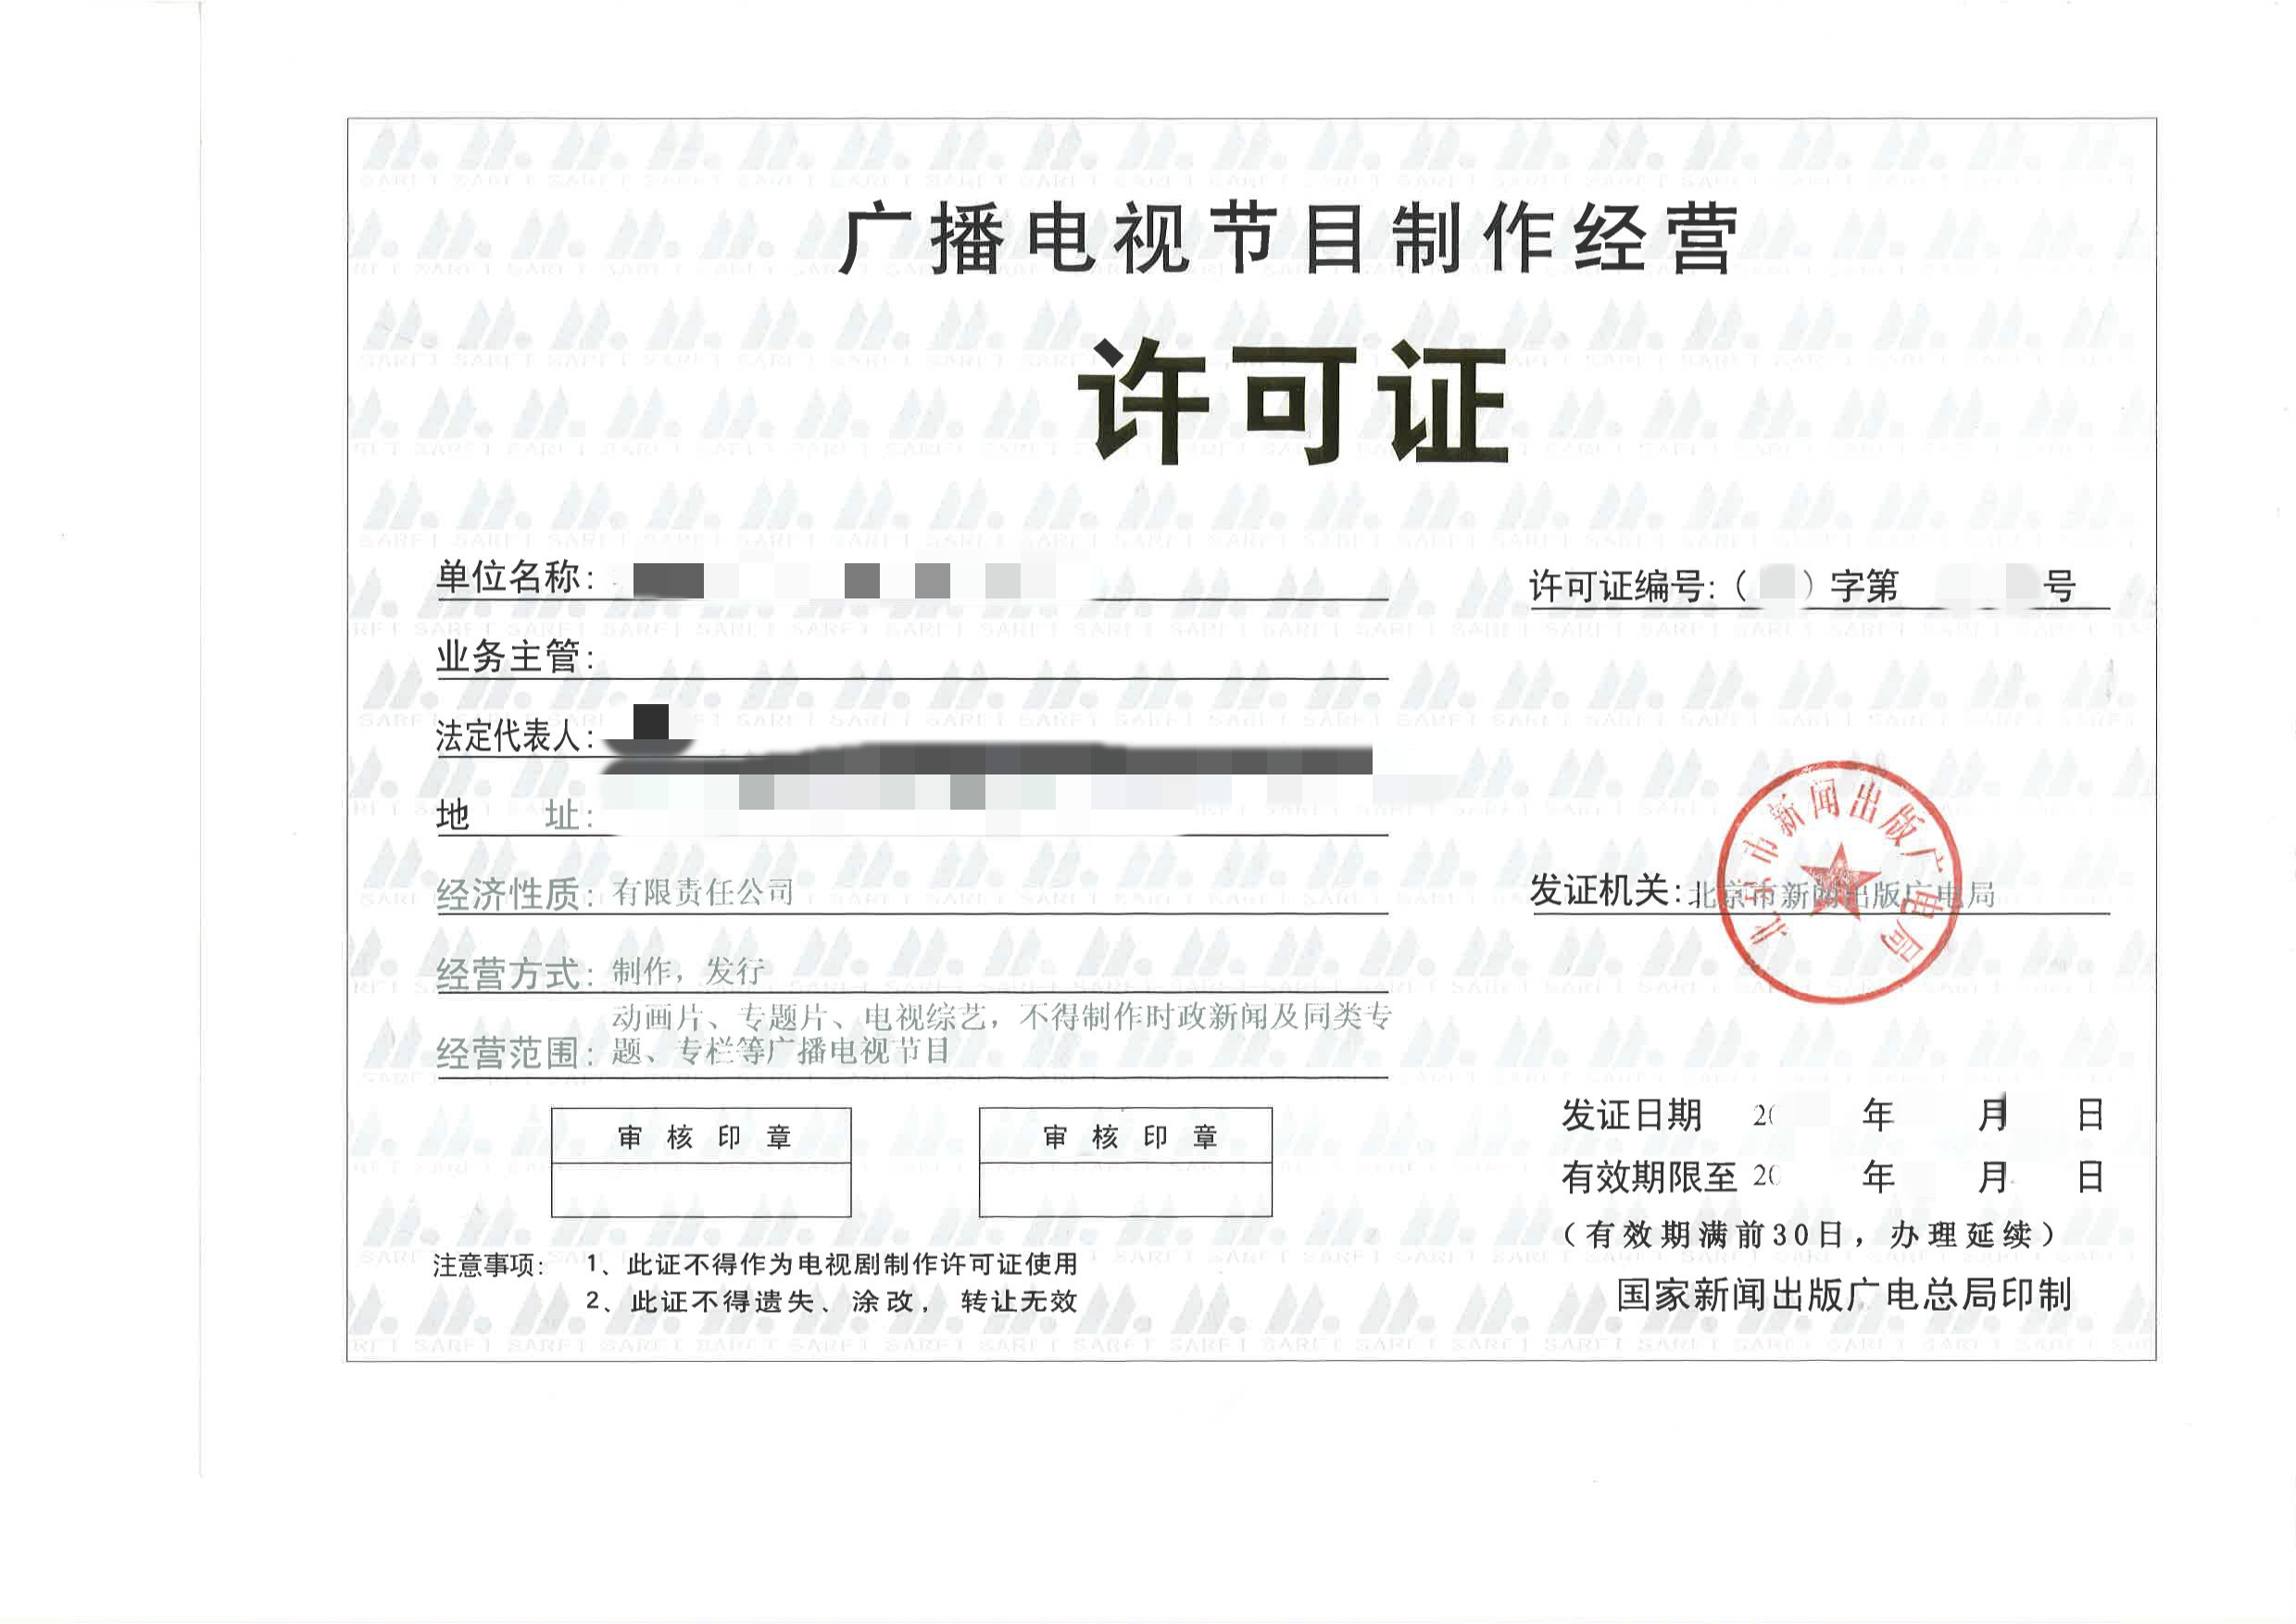 Policy Legal Basis Weixin Public Doc